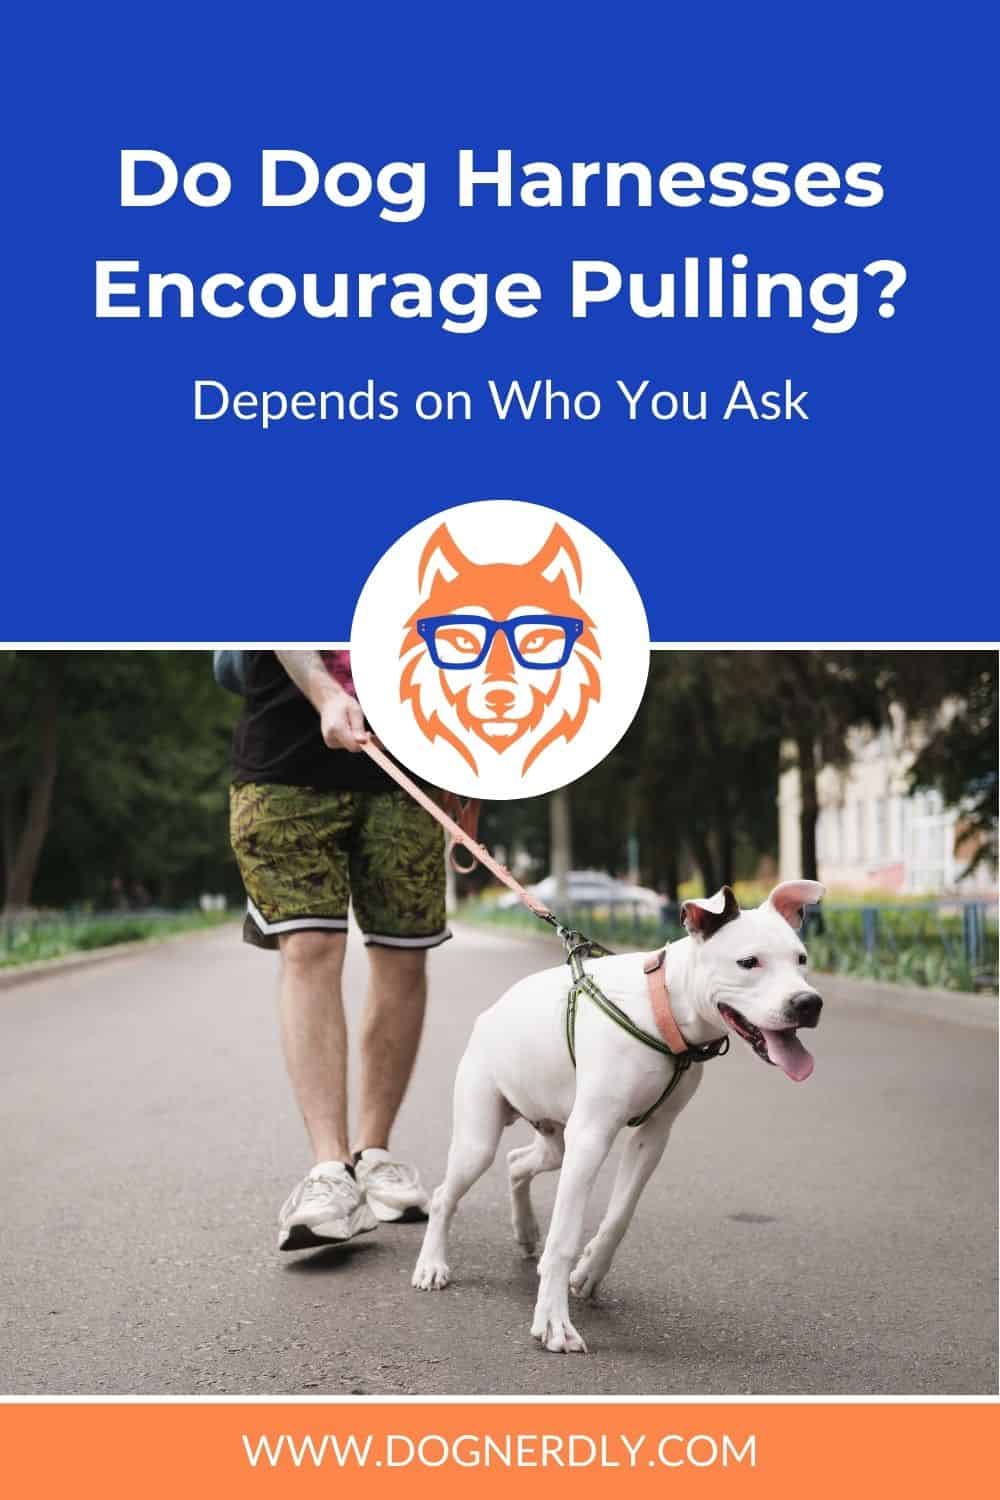 Do Dog Harnesses Encourage Pulling? Depends on Who You Ask